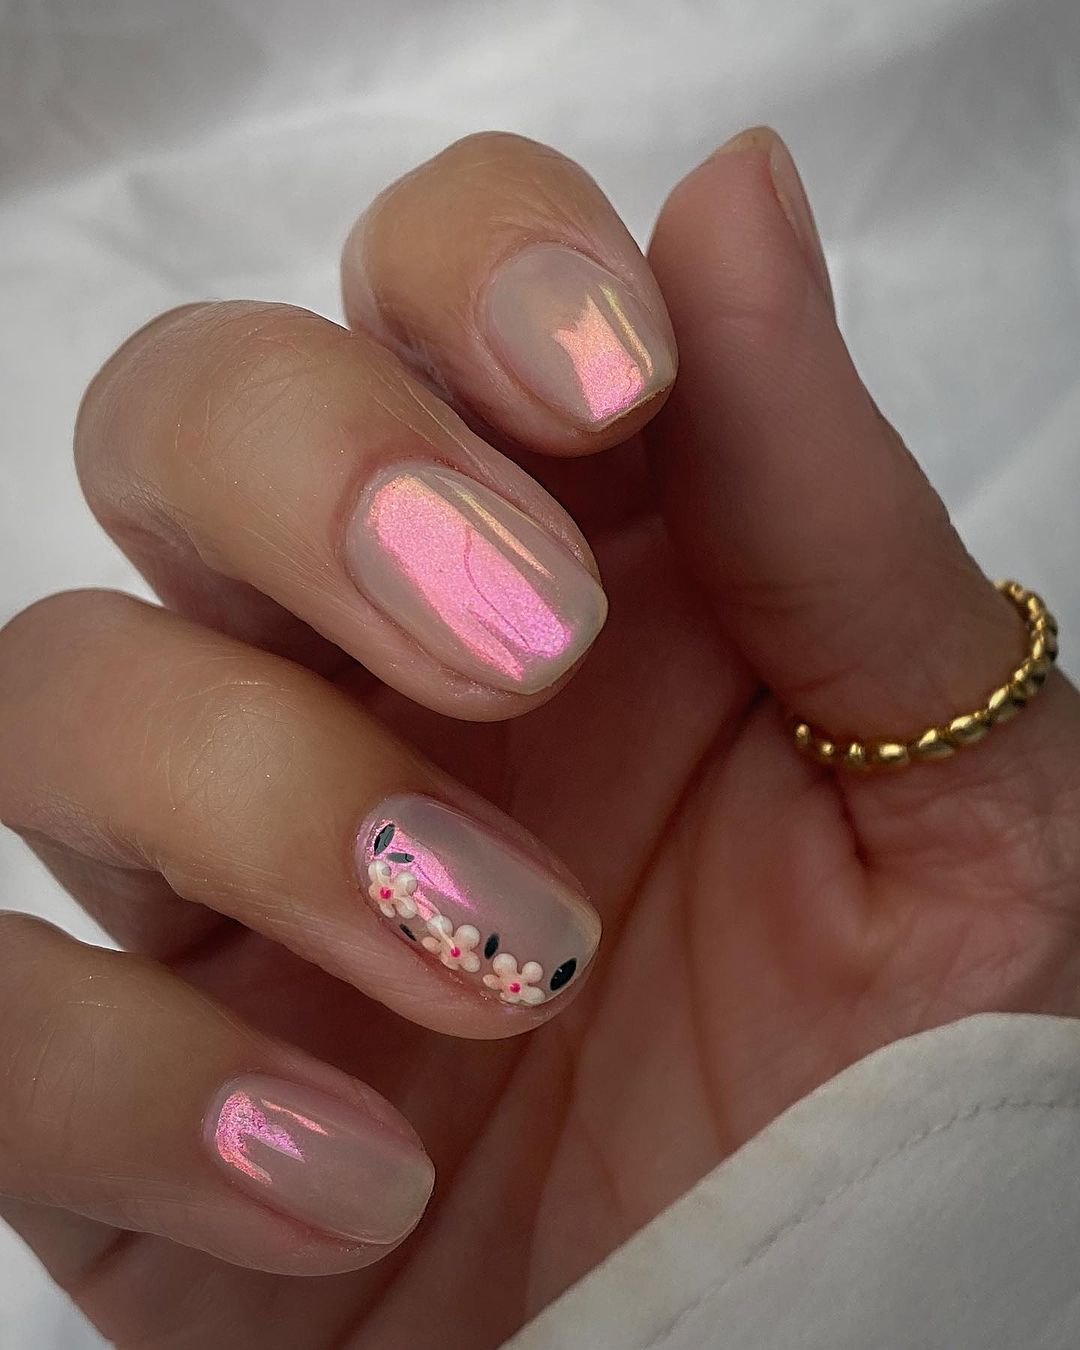 Short Pink Chrome Nails with Cherry Design